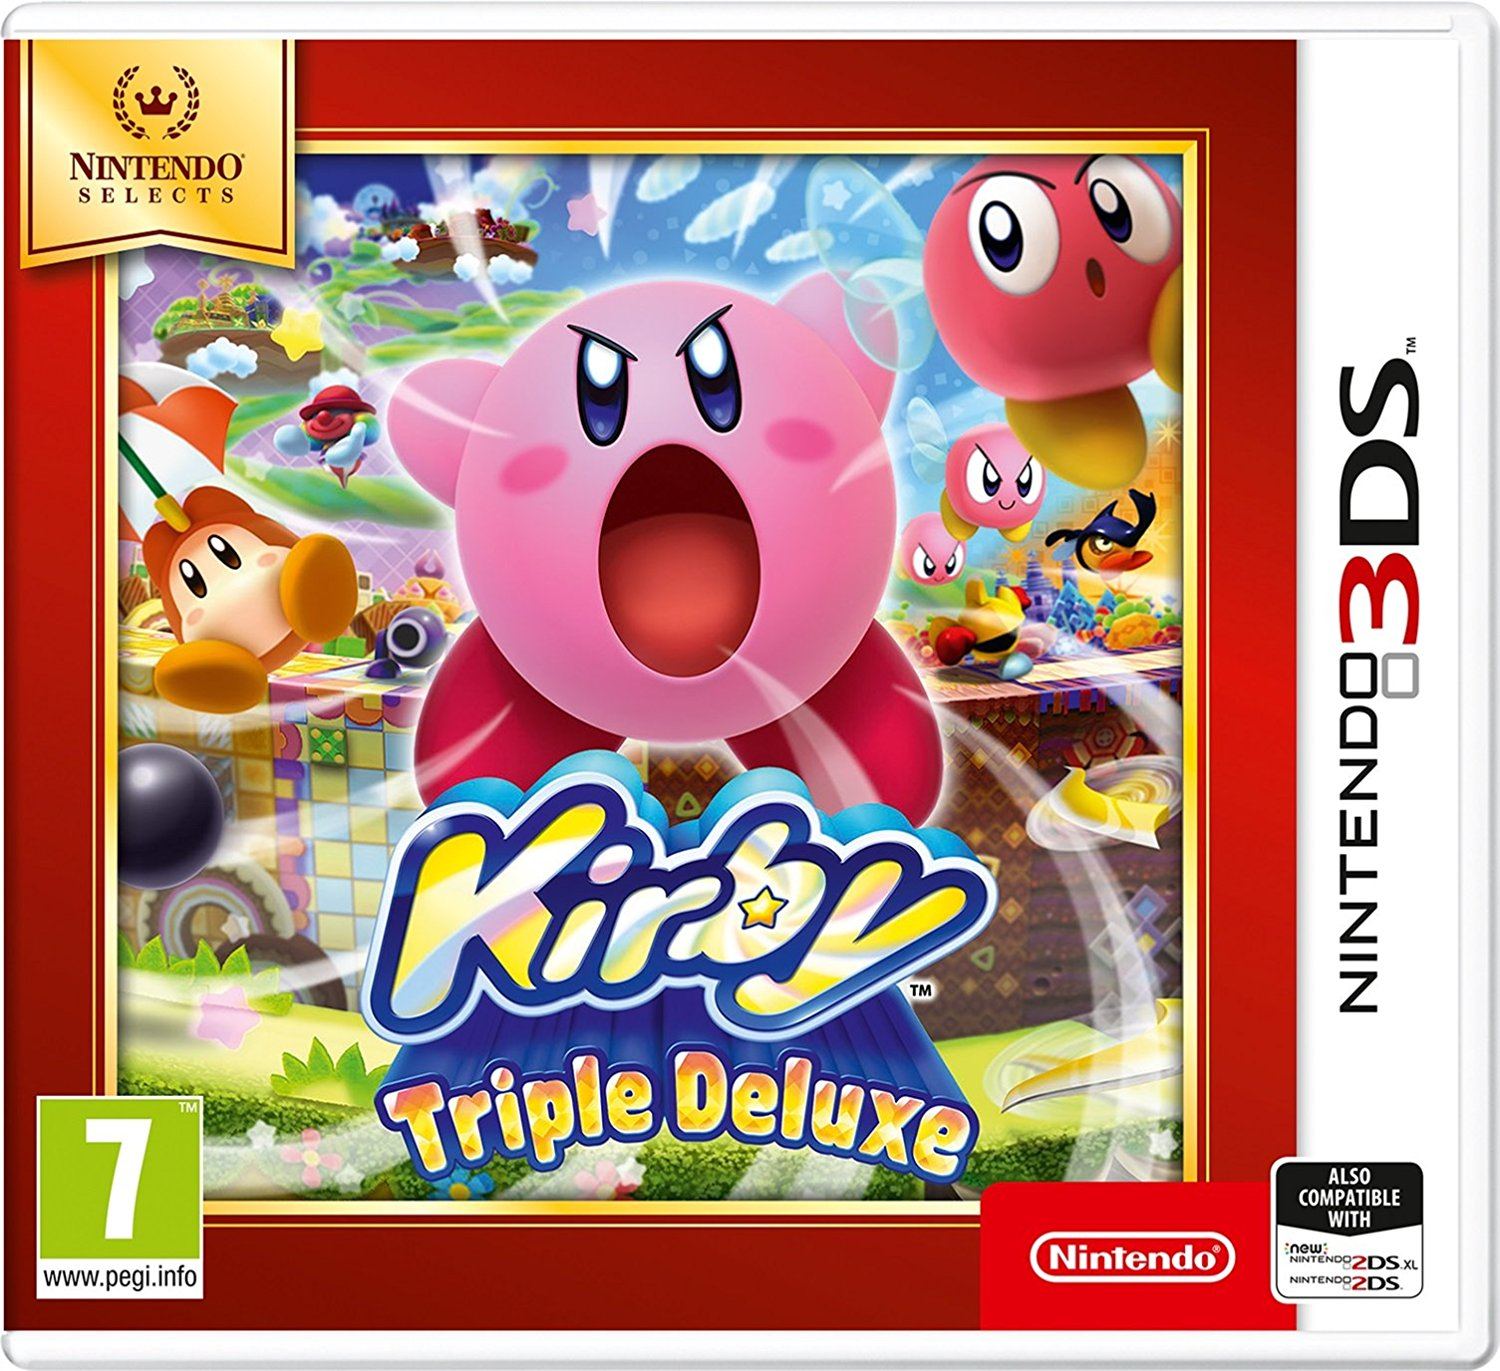 Kirby: Triple Deluxe (Nintendo Selects) for Nintendo 3DS